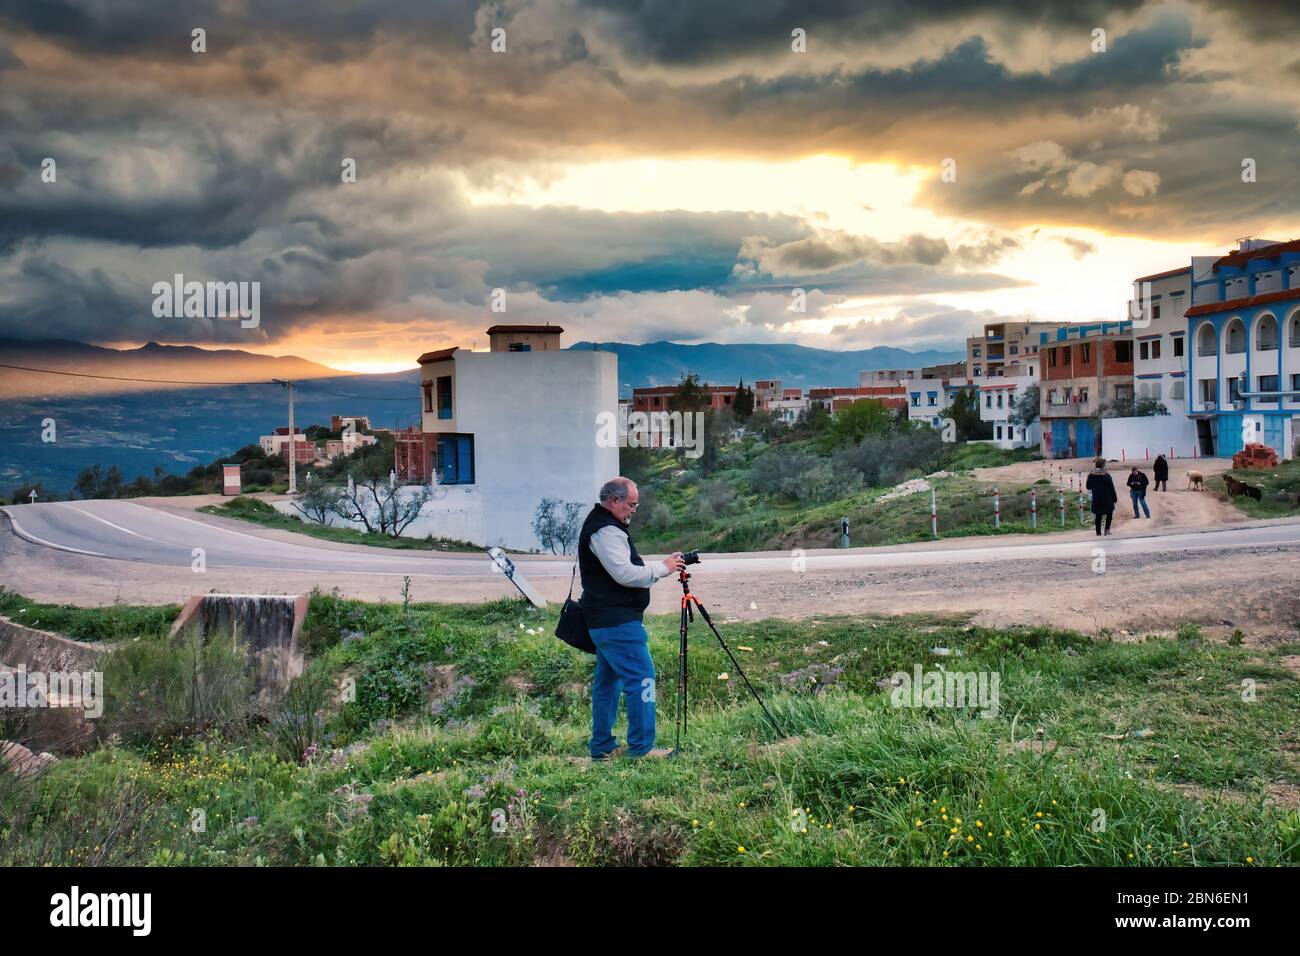 Chefchaouen, Morocco - April 30, 2018: Man taking photos of a dramatic sunset on the outskirts of Chaouen Stock Photo